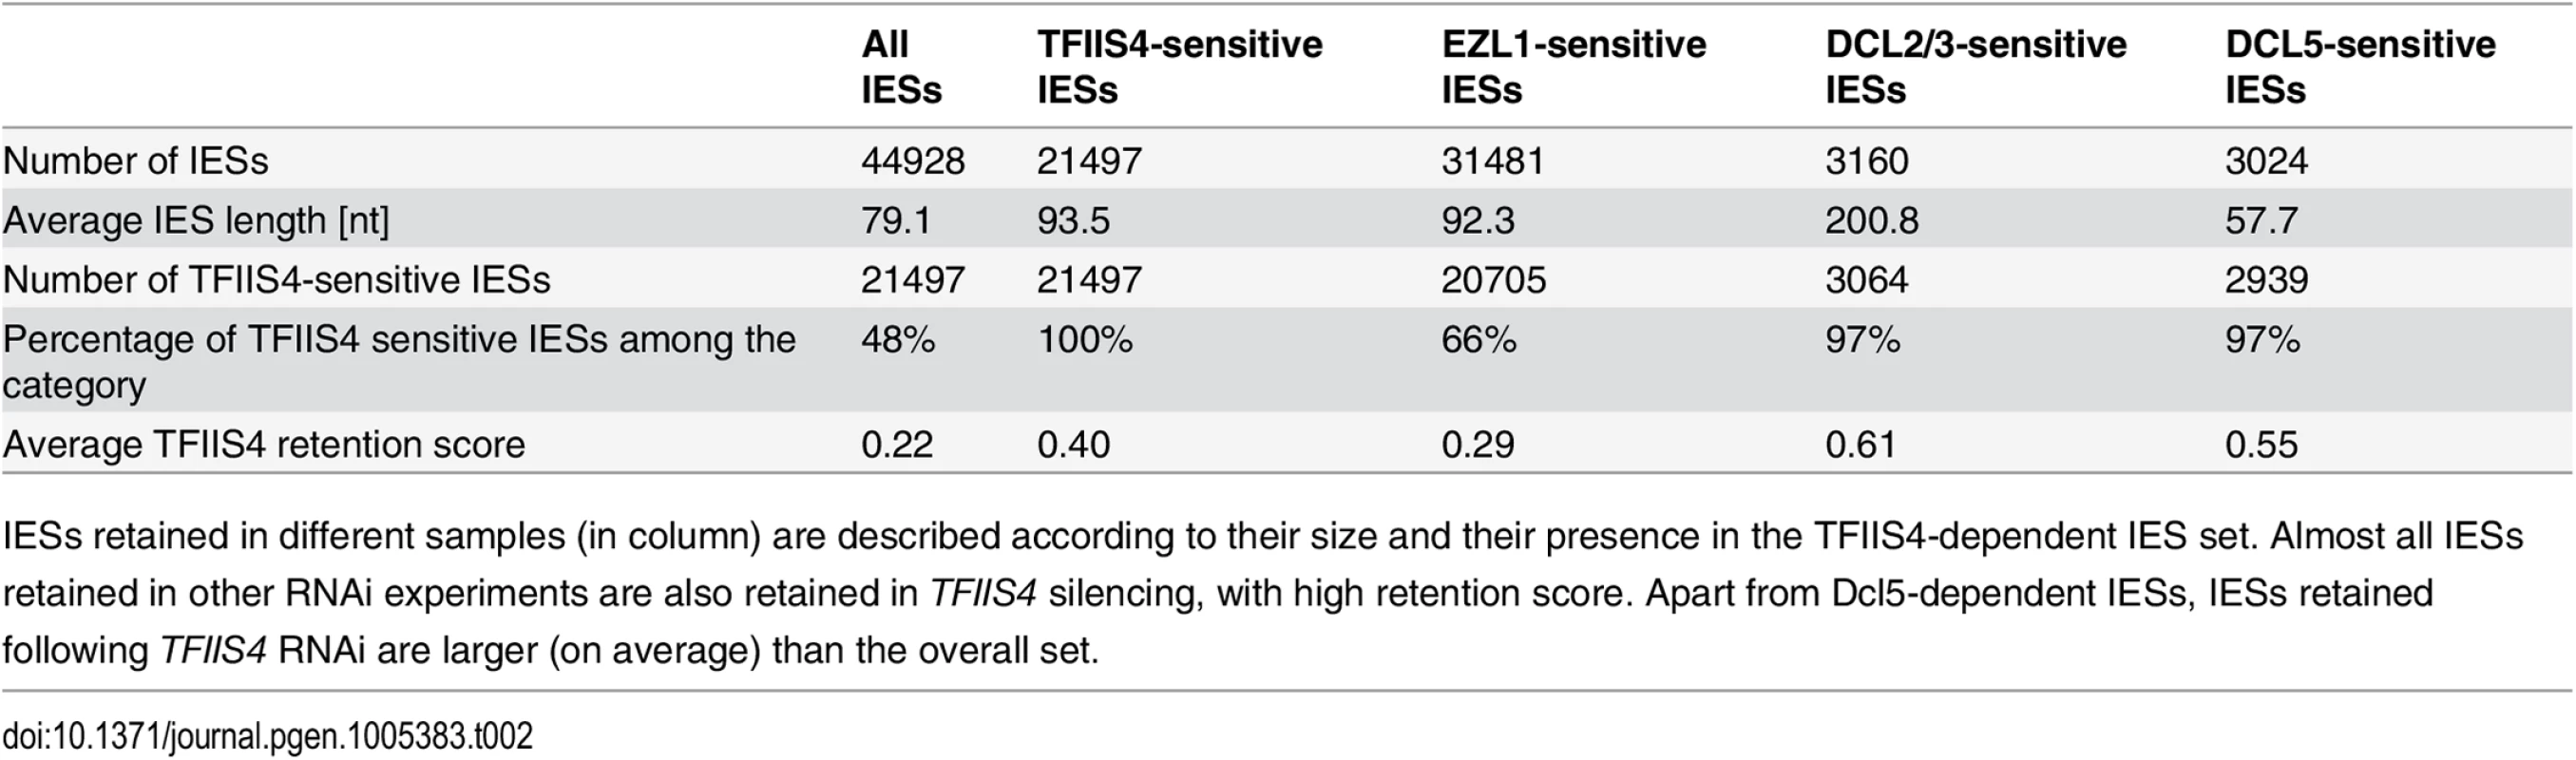 Global analysis of genome rearrangements in <i>TFIIS4</i> silencing—comparison with <i>EZL1</i>, <i>DCL2/3</i> and <i>DCL5</i>.